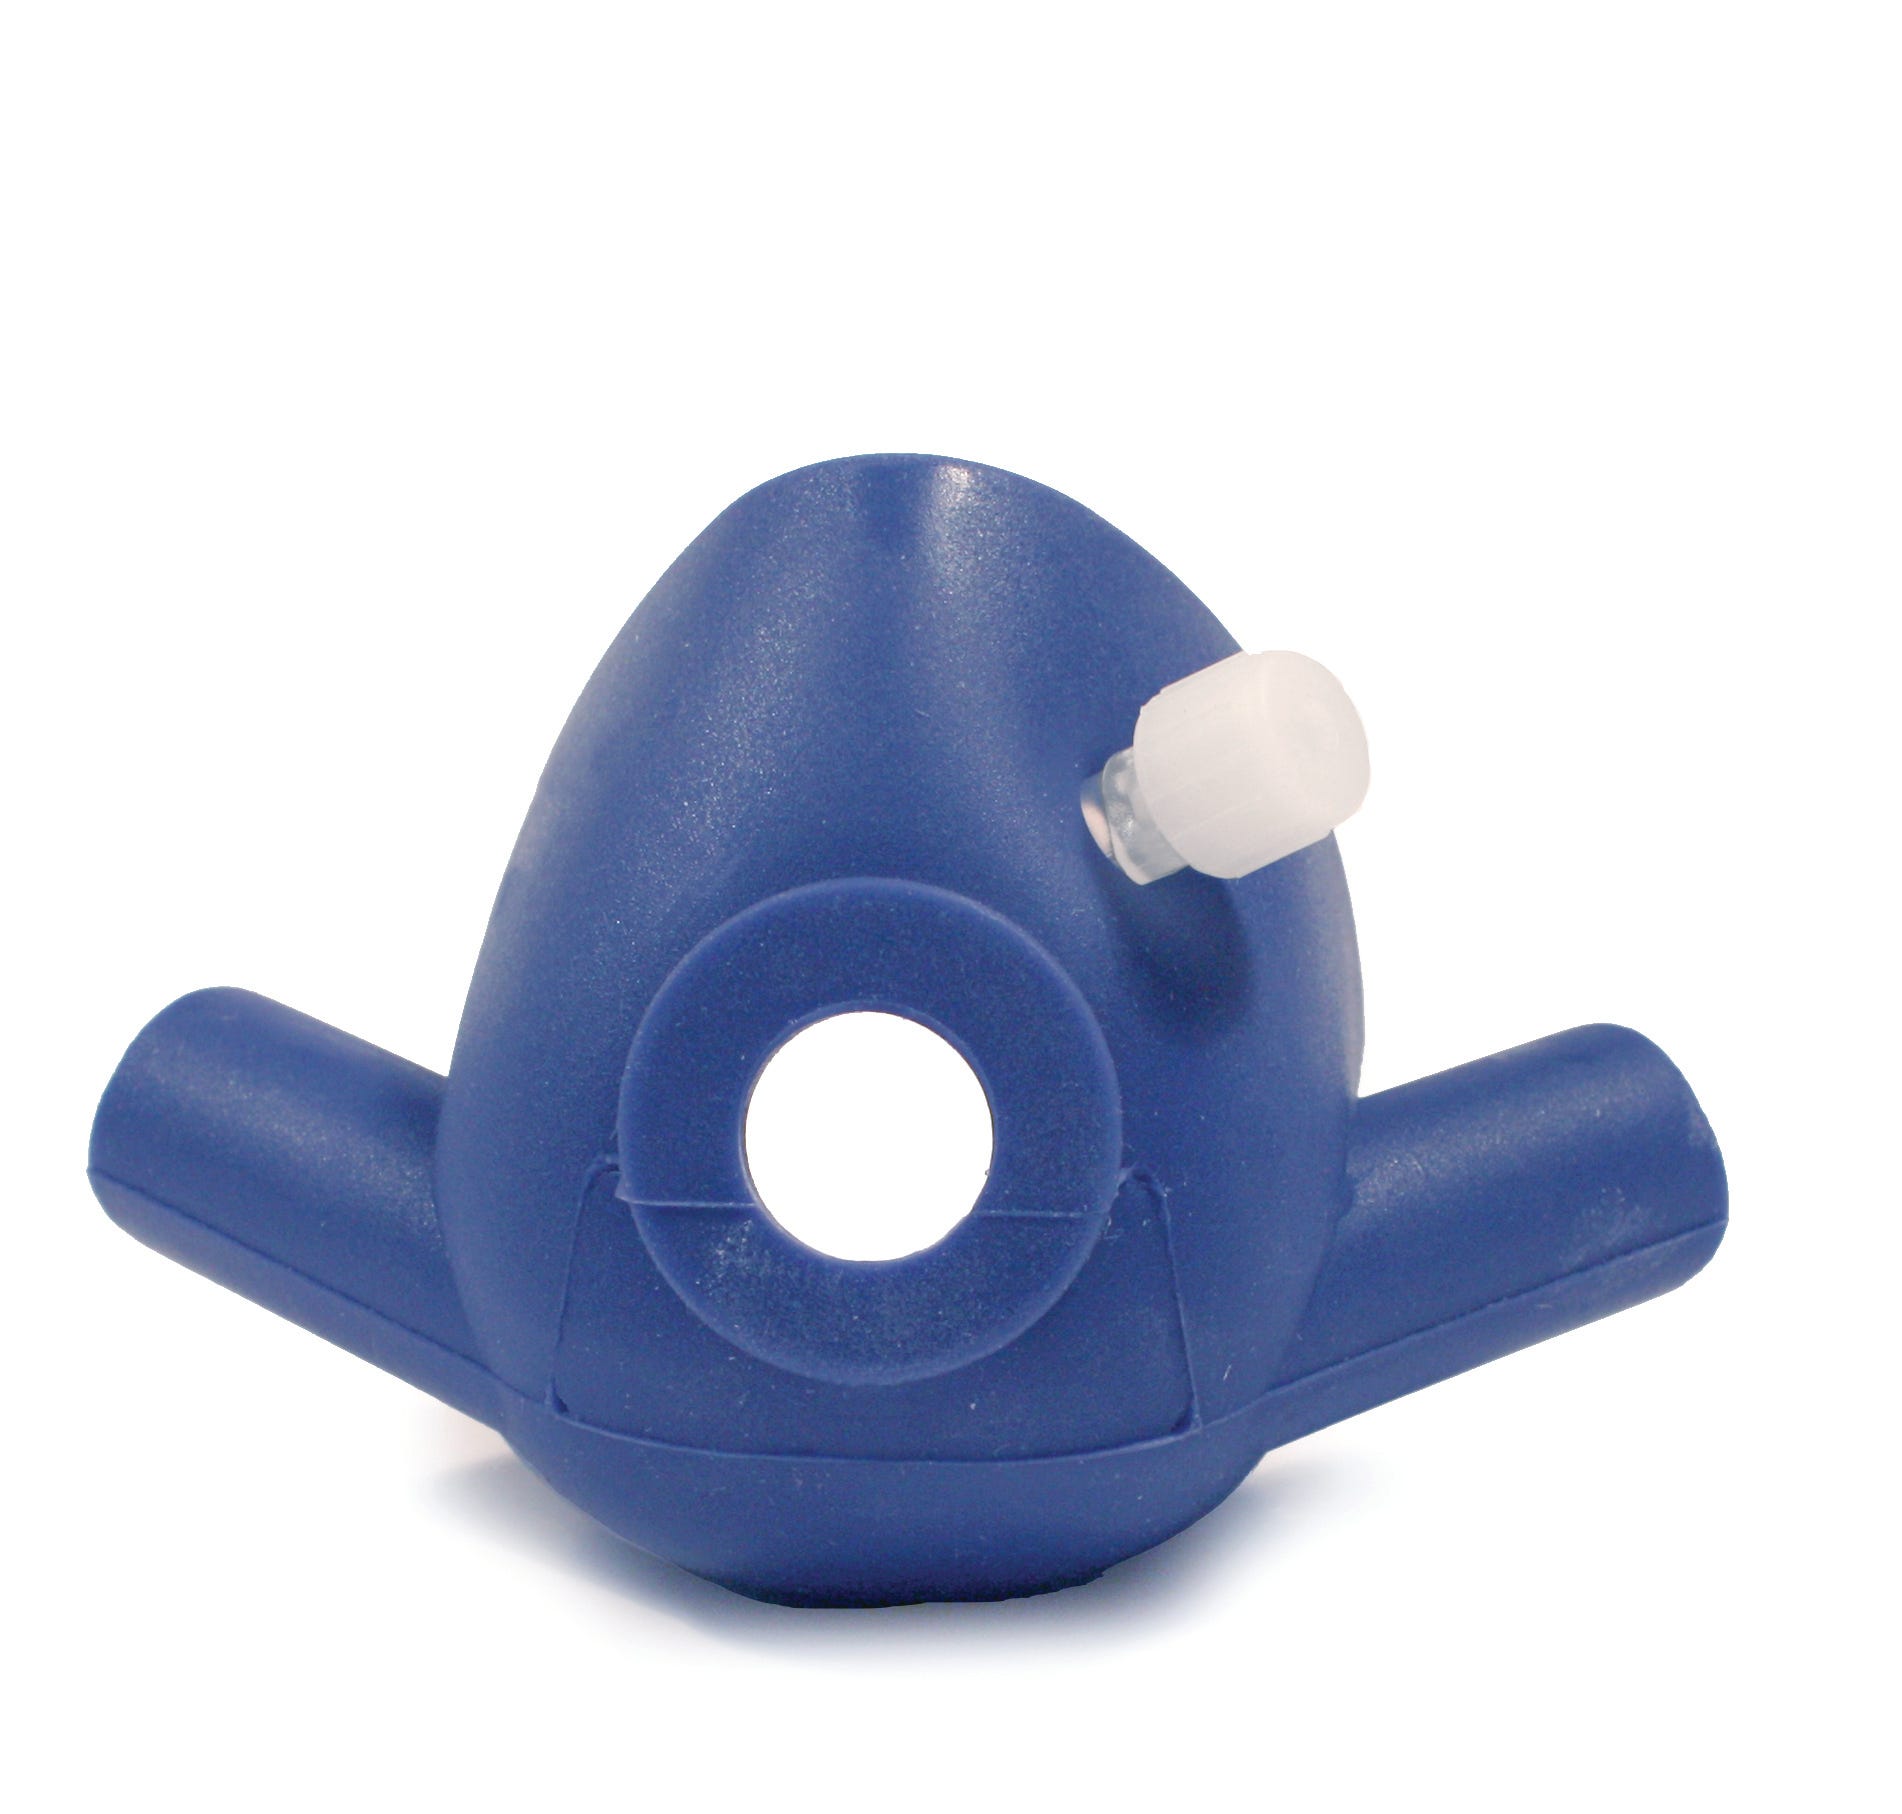 Prepunched Autoclavable Nasal Hoods with Luer Lock Adapter, Blue, Large, 3/Pkg